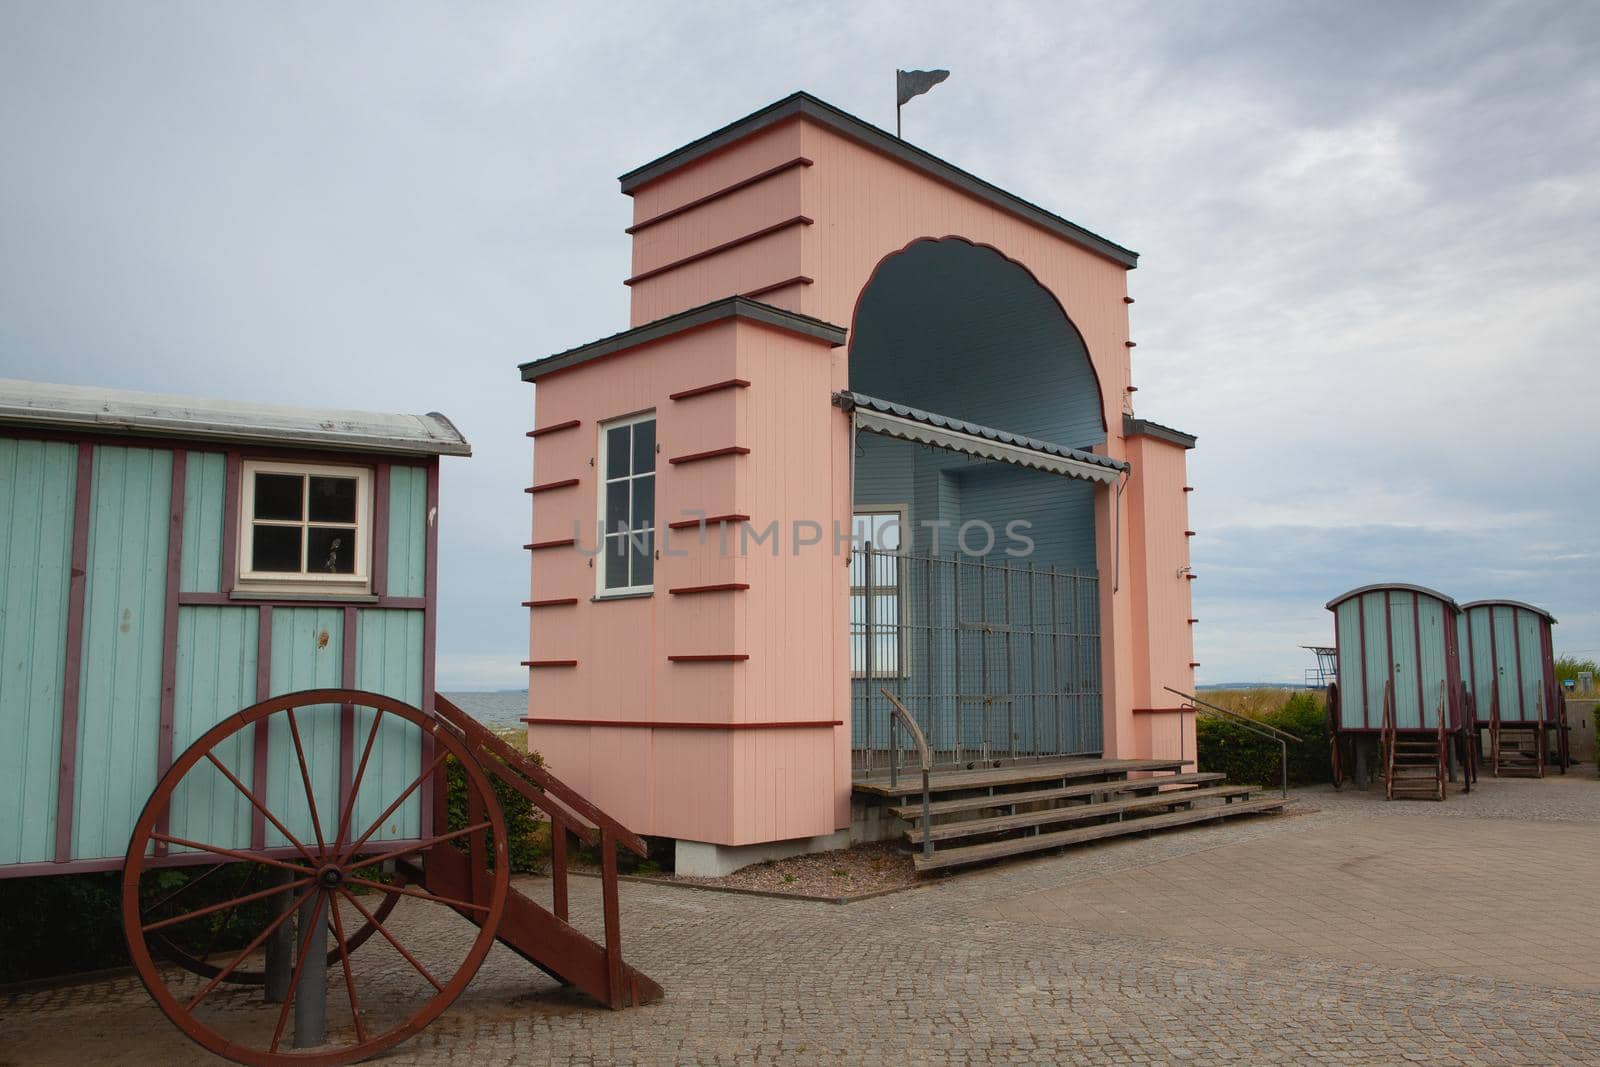 Funny Bathing Cabin on Usedom island, Germany. by CaptureLight